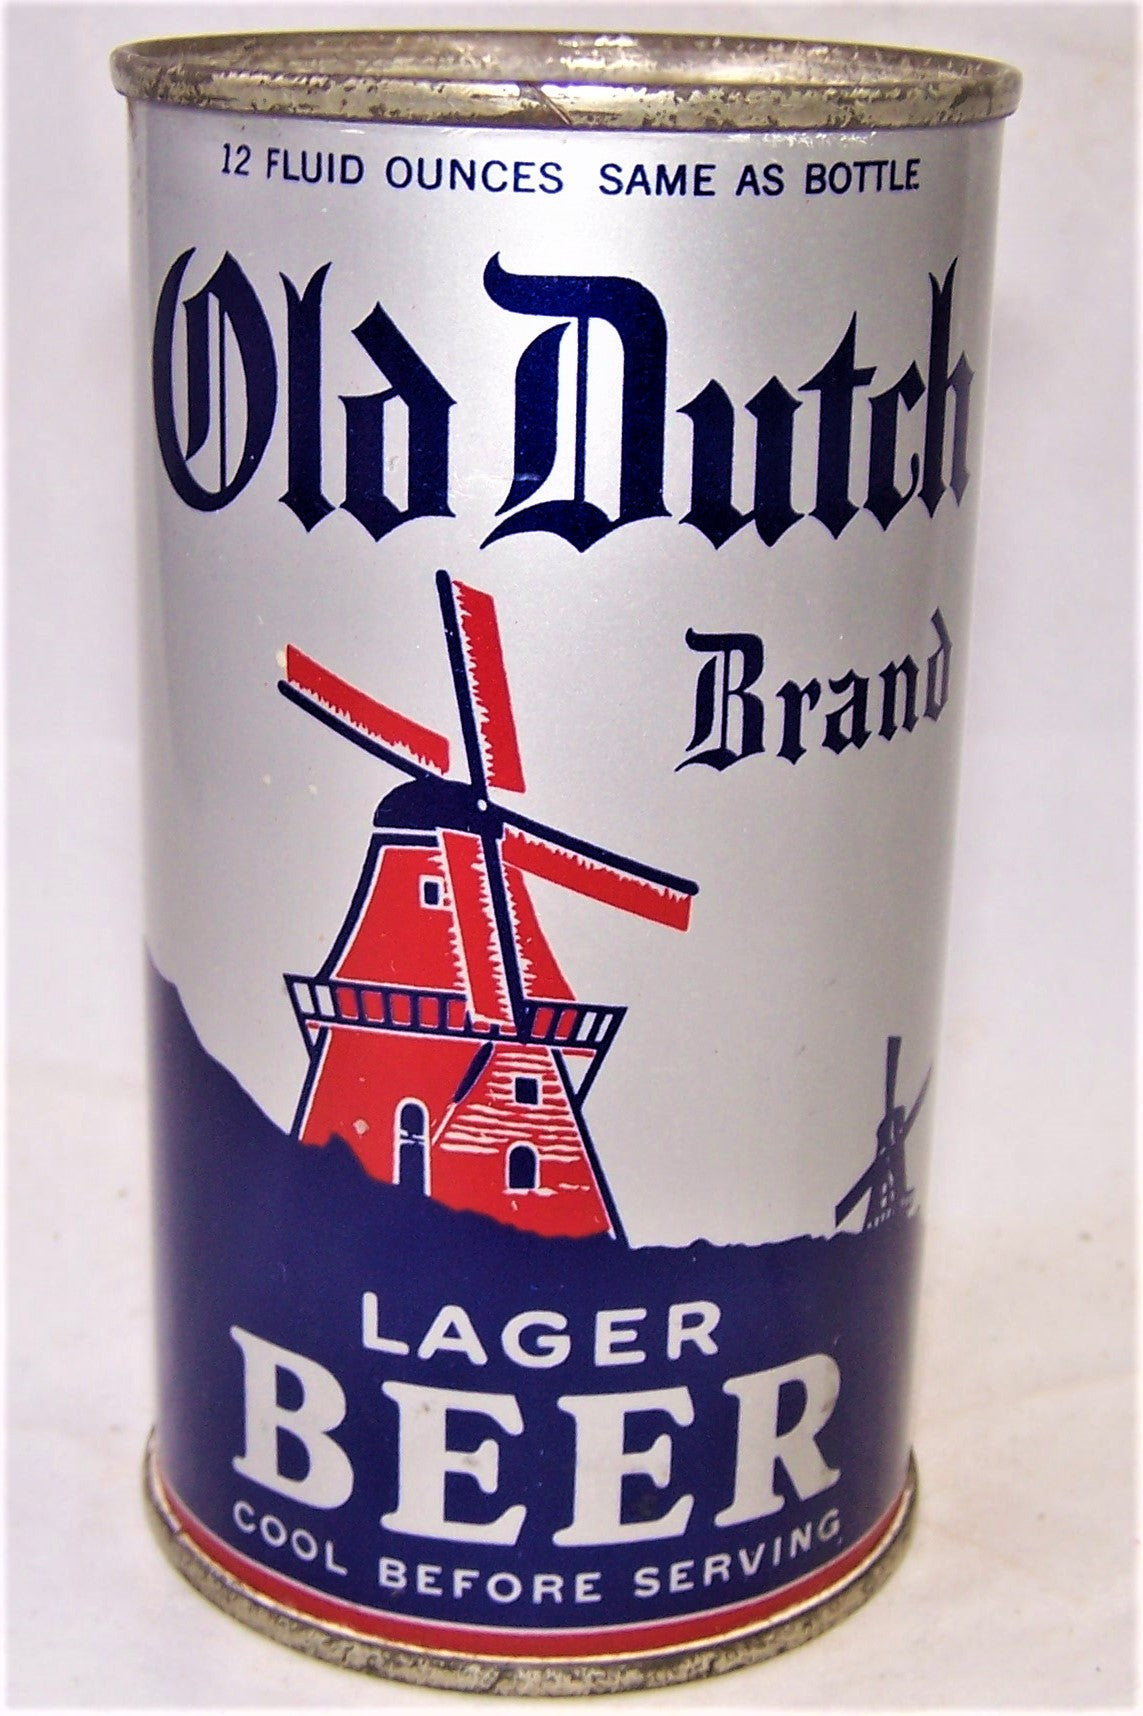 Old Dutch Brand Lager Beer, Lilek # 599 and USBC 105-35, Grade 1/1+ Sold on 04/05/19